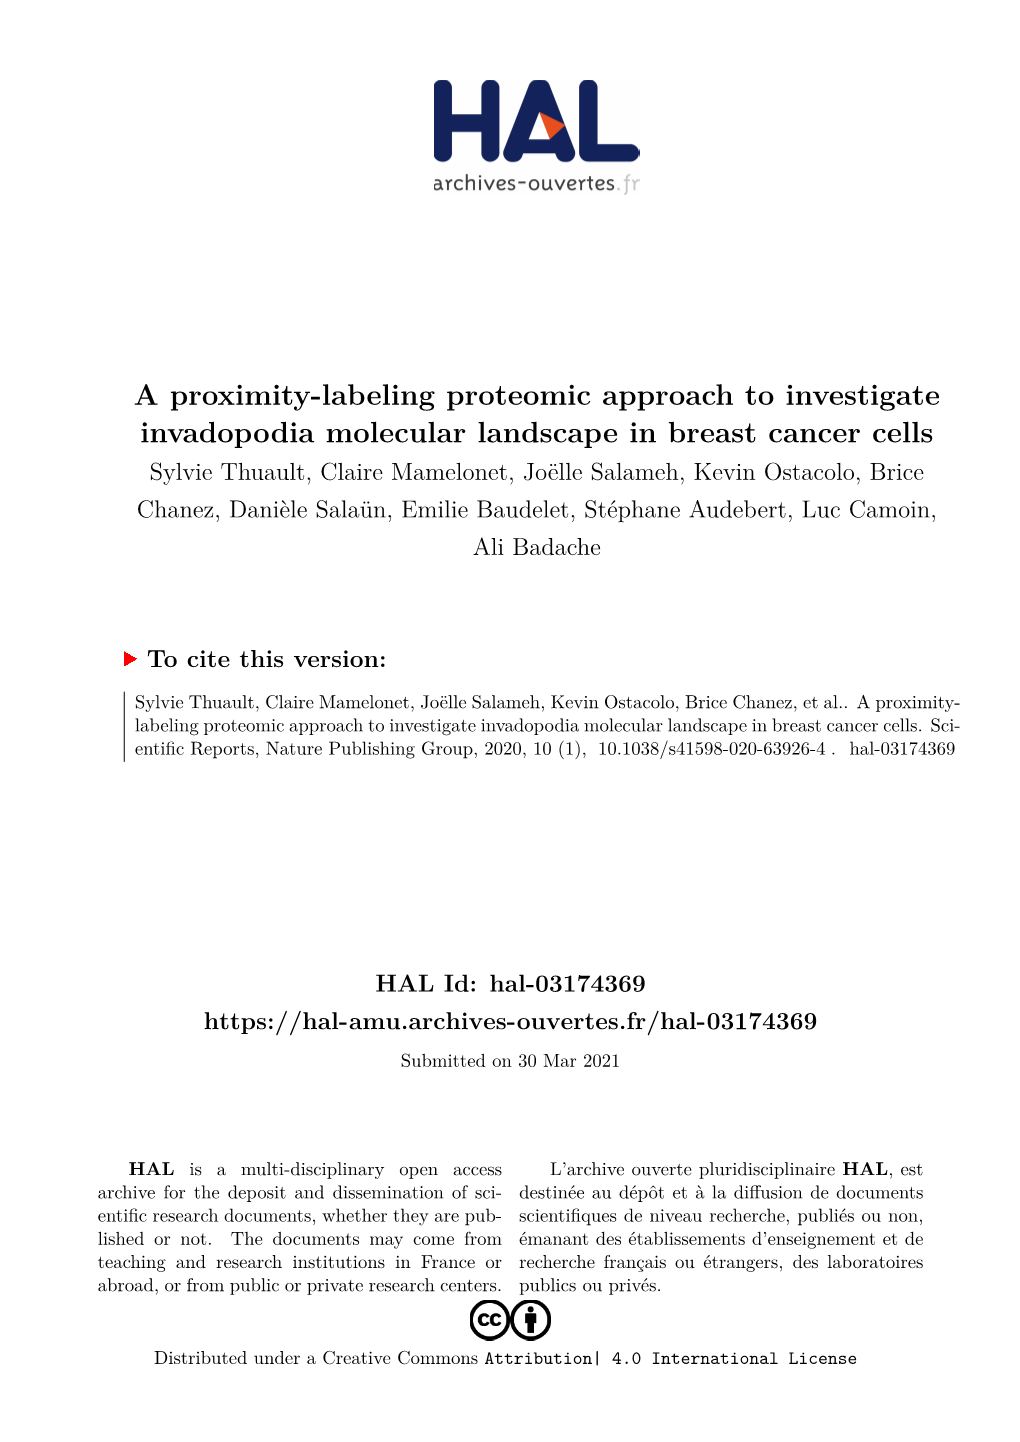 A Proximity-Labeling Proteomic Approach to Investigate